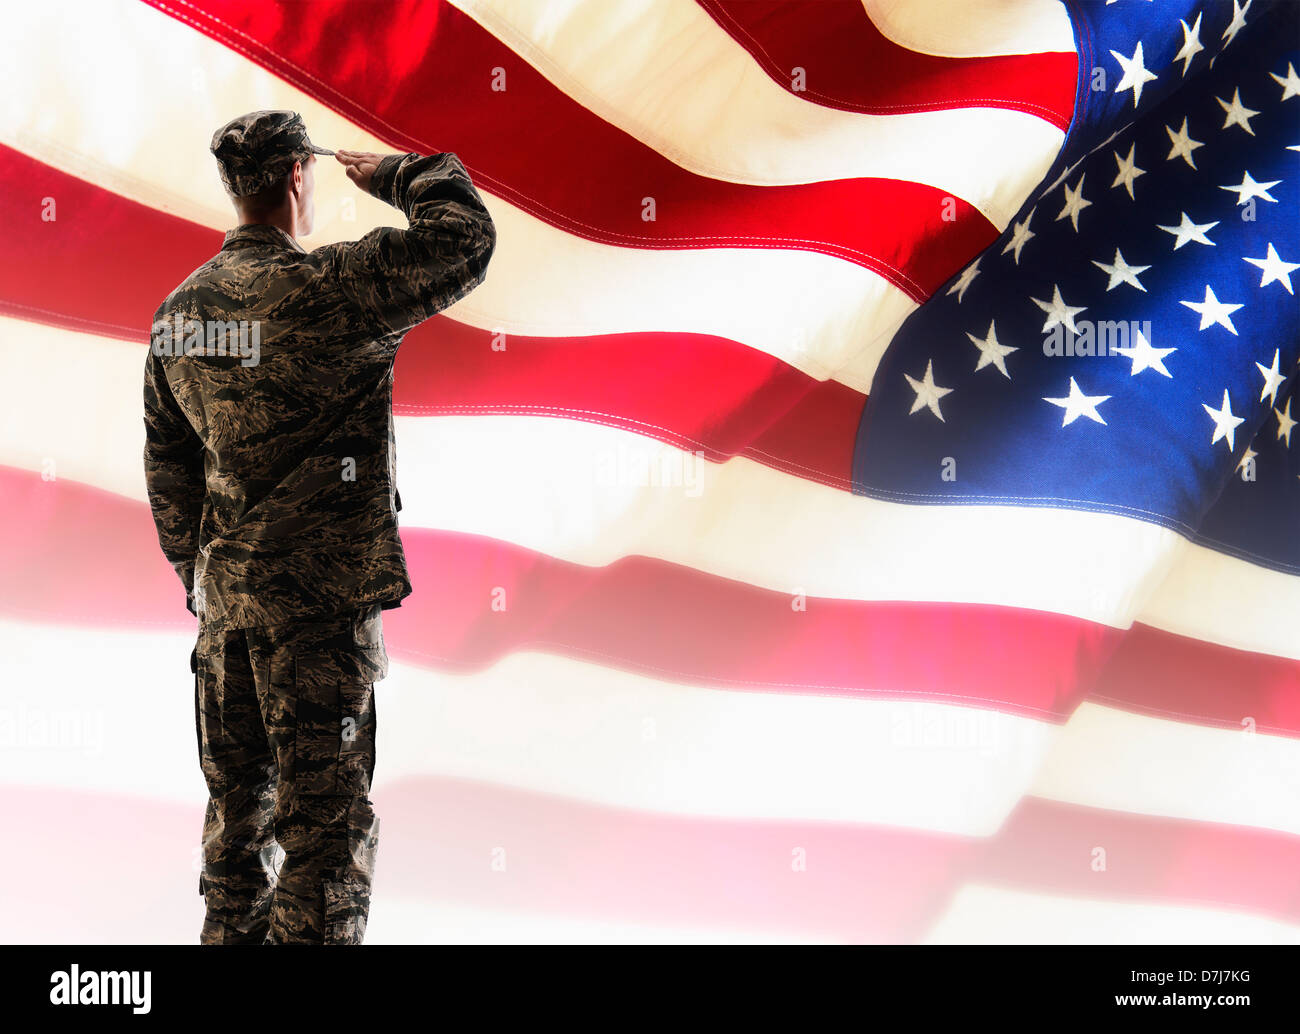 Army Soldier Saluting In Front Of American Flag Stock